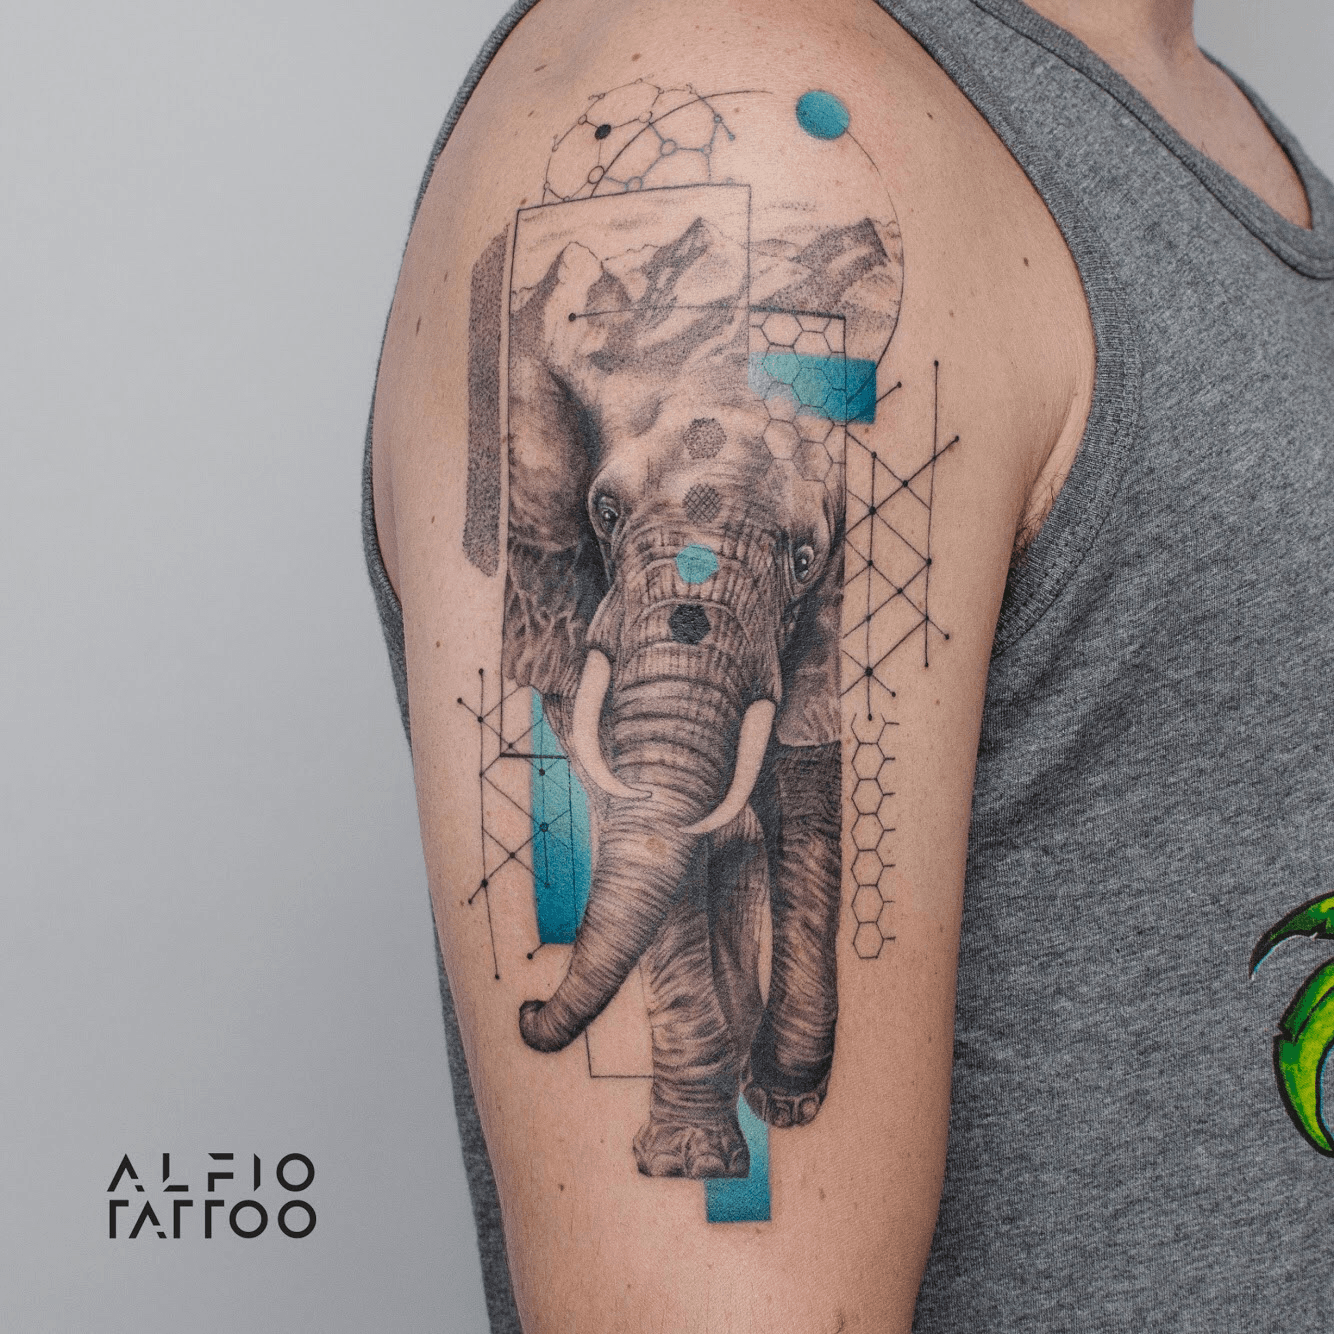 The Symbolism and Meaning of Elephant and Ganesha Tattoos  Self Tattoo